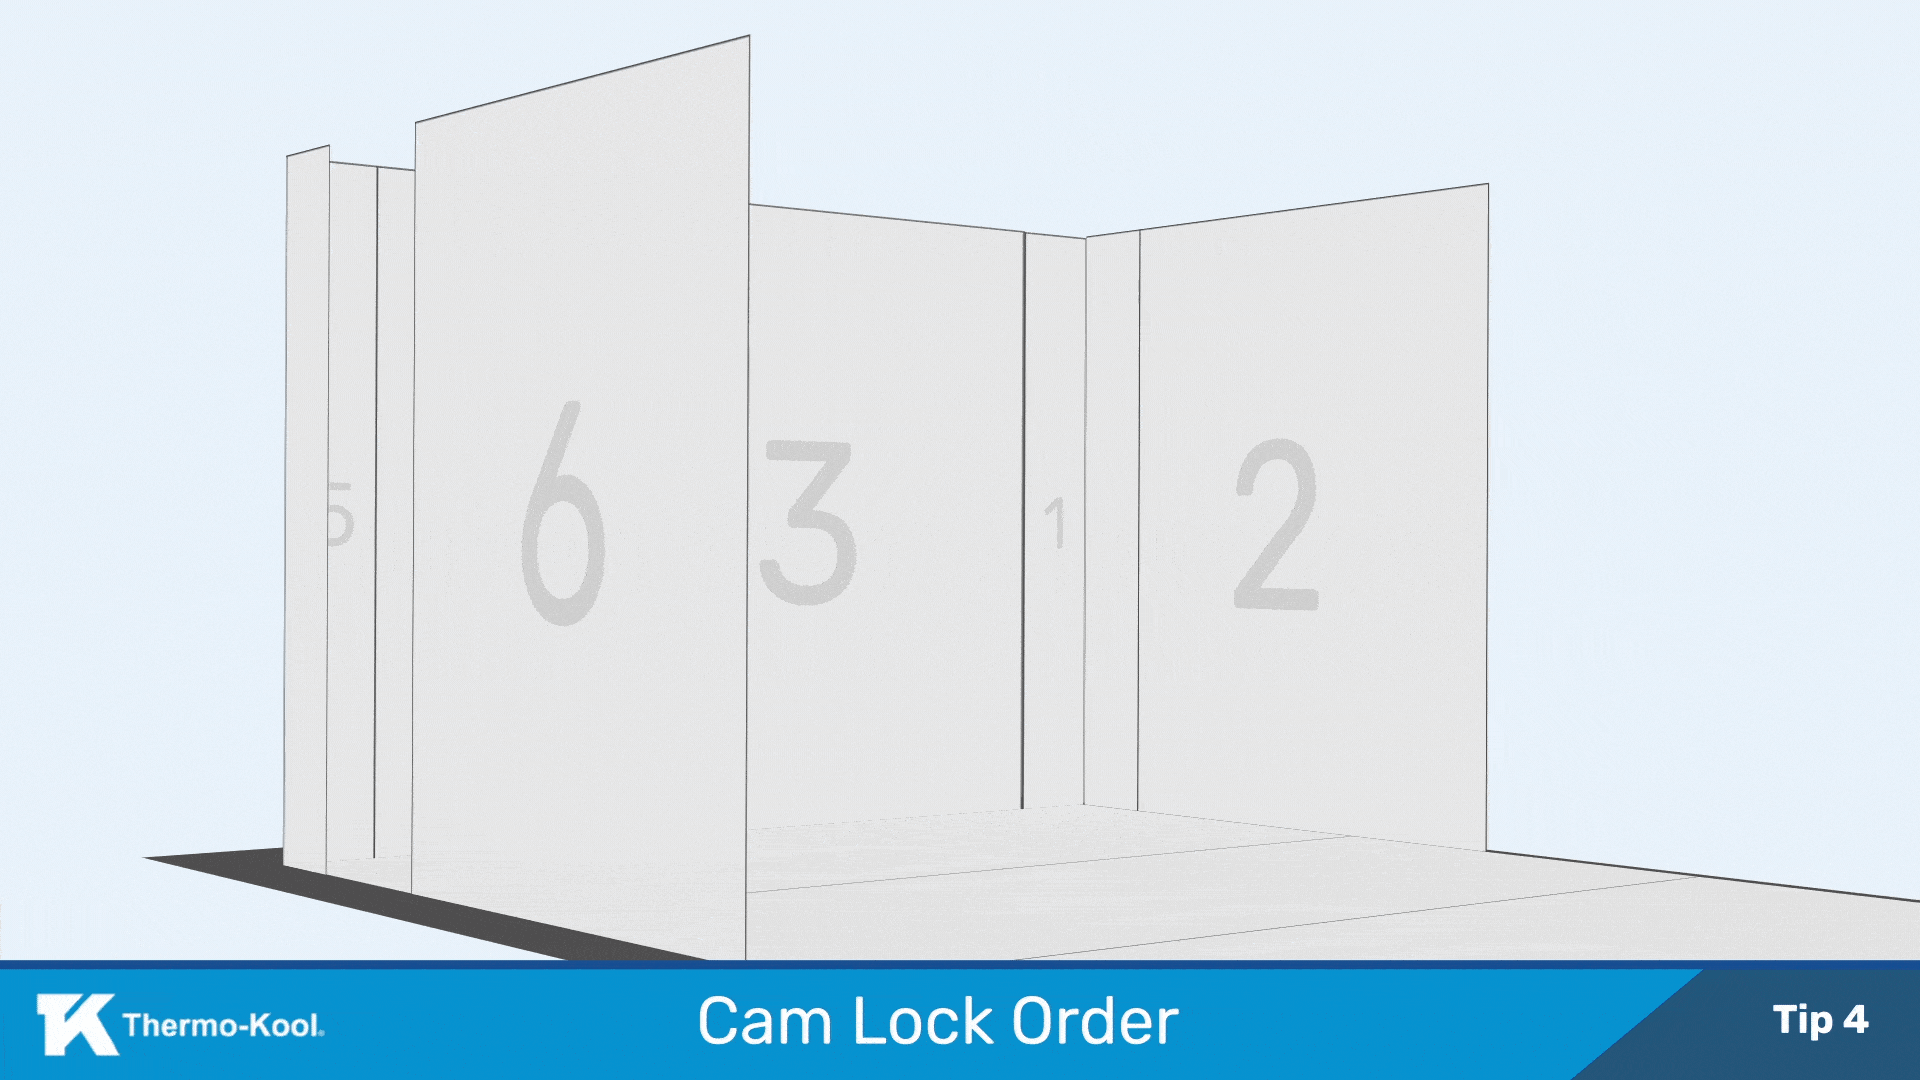 An animated diagram illustrating the cam lock order.